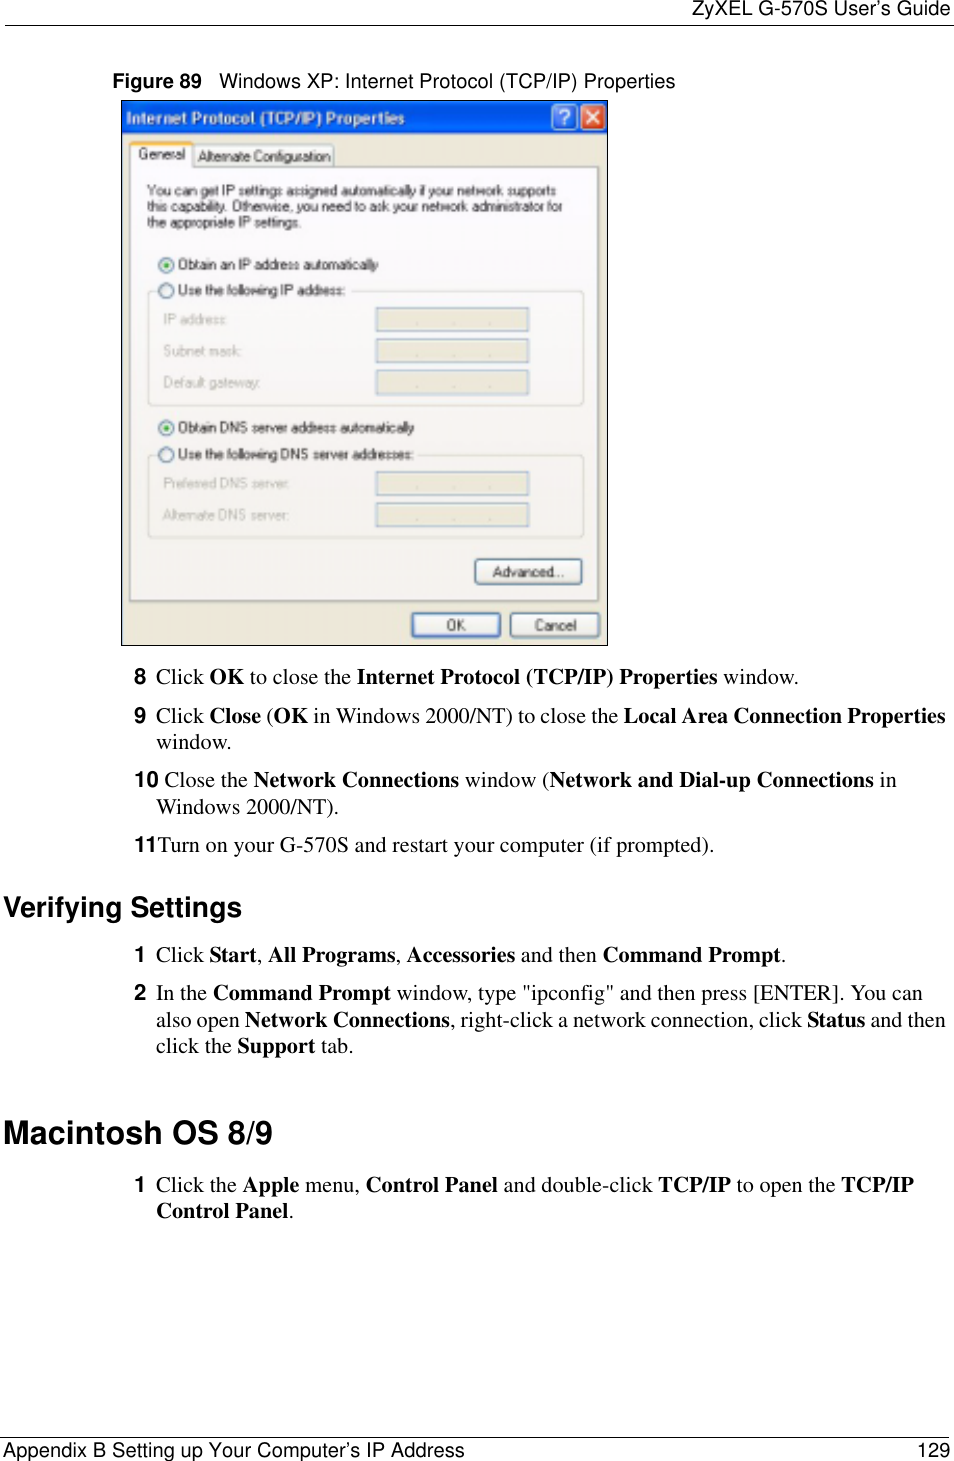 ZyXEL G-570S User’s GuideAppendix B Setting up Your Computer’s IP Address 129Figure 89   Windows XP: Internet Protocol (TCP/IP) Properties8Click OK to close the Internet Protocol (TCP/IP) Properties window.9Click Close (OK in Windows 2000/NT) to close the Local Area Connection Propertieswindow.10 Close the Network Connections window (Network and Dial-up Connections inWindows 2000/NT).11Turn on your G-570S and restart your computer (if prompted).Verifying Settings1Click Start,All Programs,Accessories and then Command Prompt.2In the Command Prompt window, type &quot;ipconfig&quot; and then press [ENTER]. You can also open Network Connections, right-click a network connection, click Status and then click the Support tab.Macintosh OS 8/9 1Click the Apple menu, Control Panel and double-click TCP/IP to open the TCP/IPControl Panel.